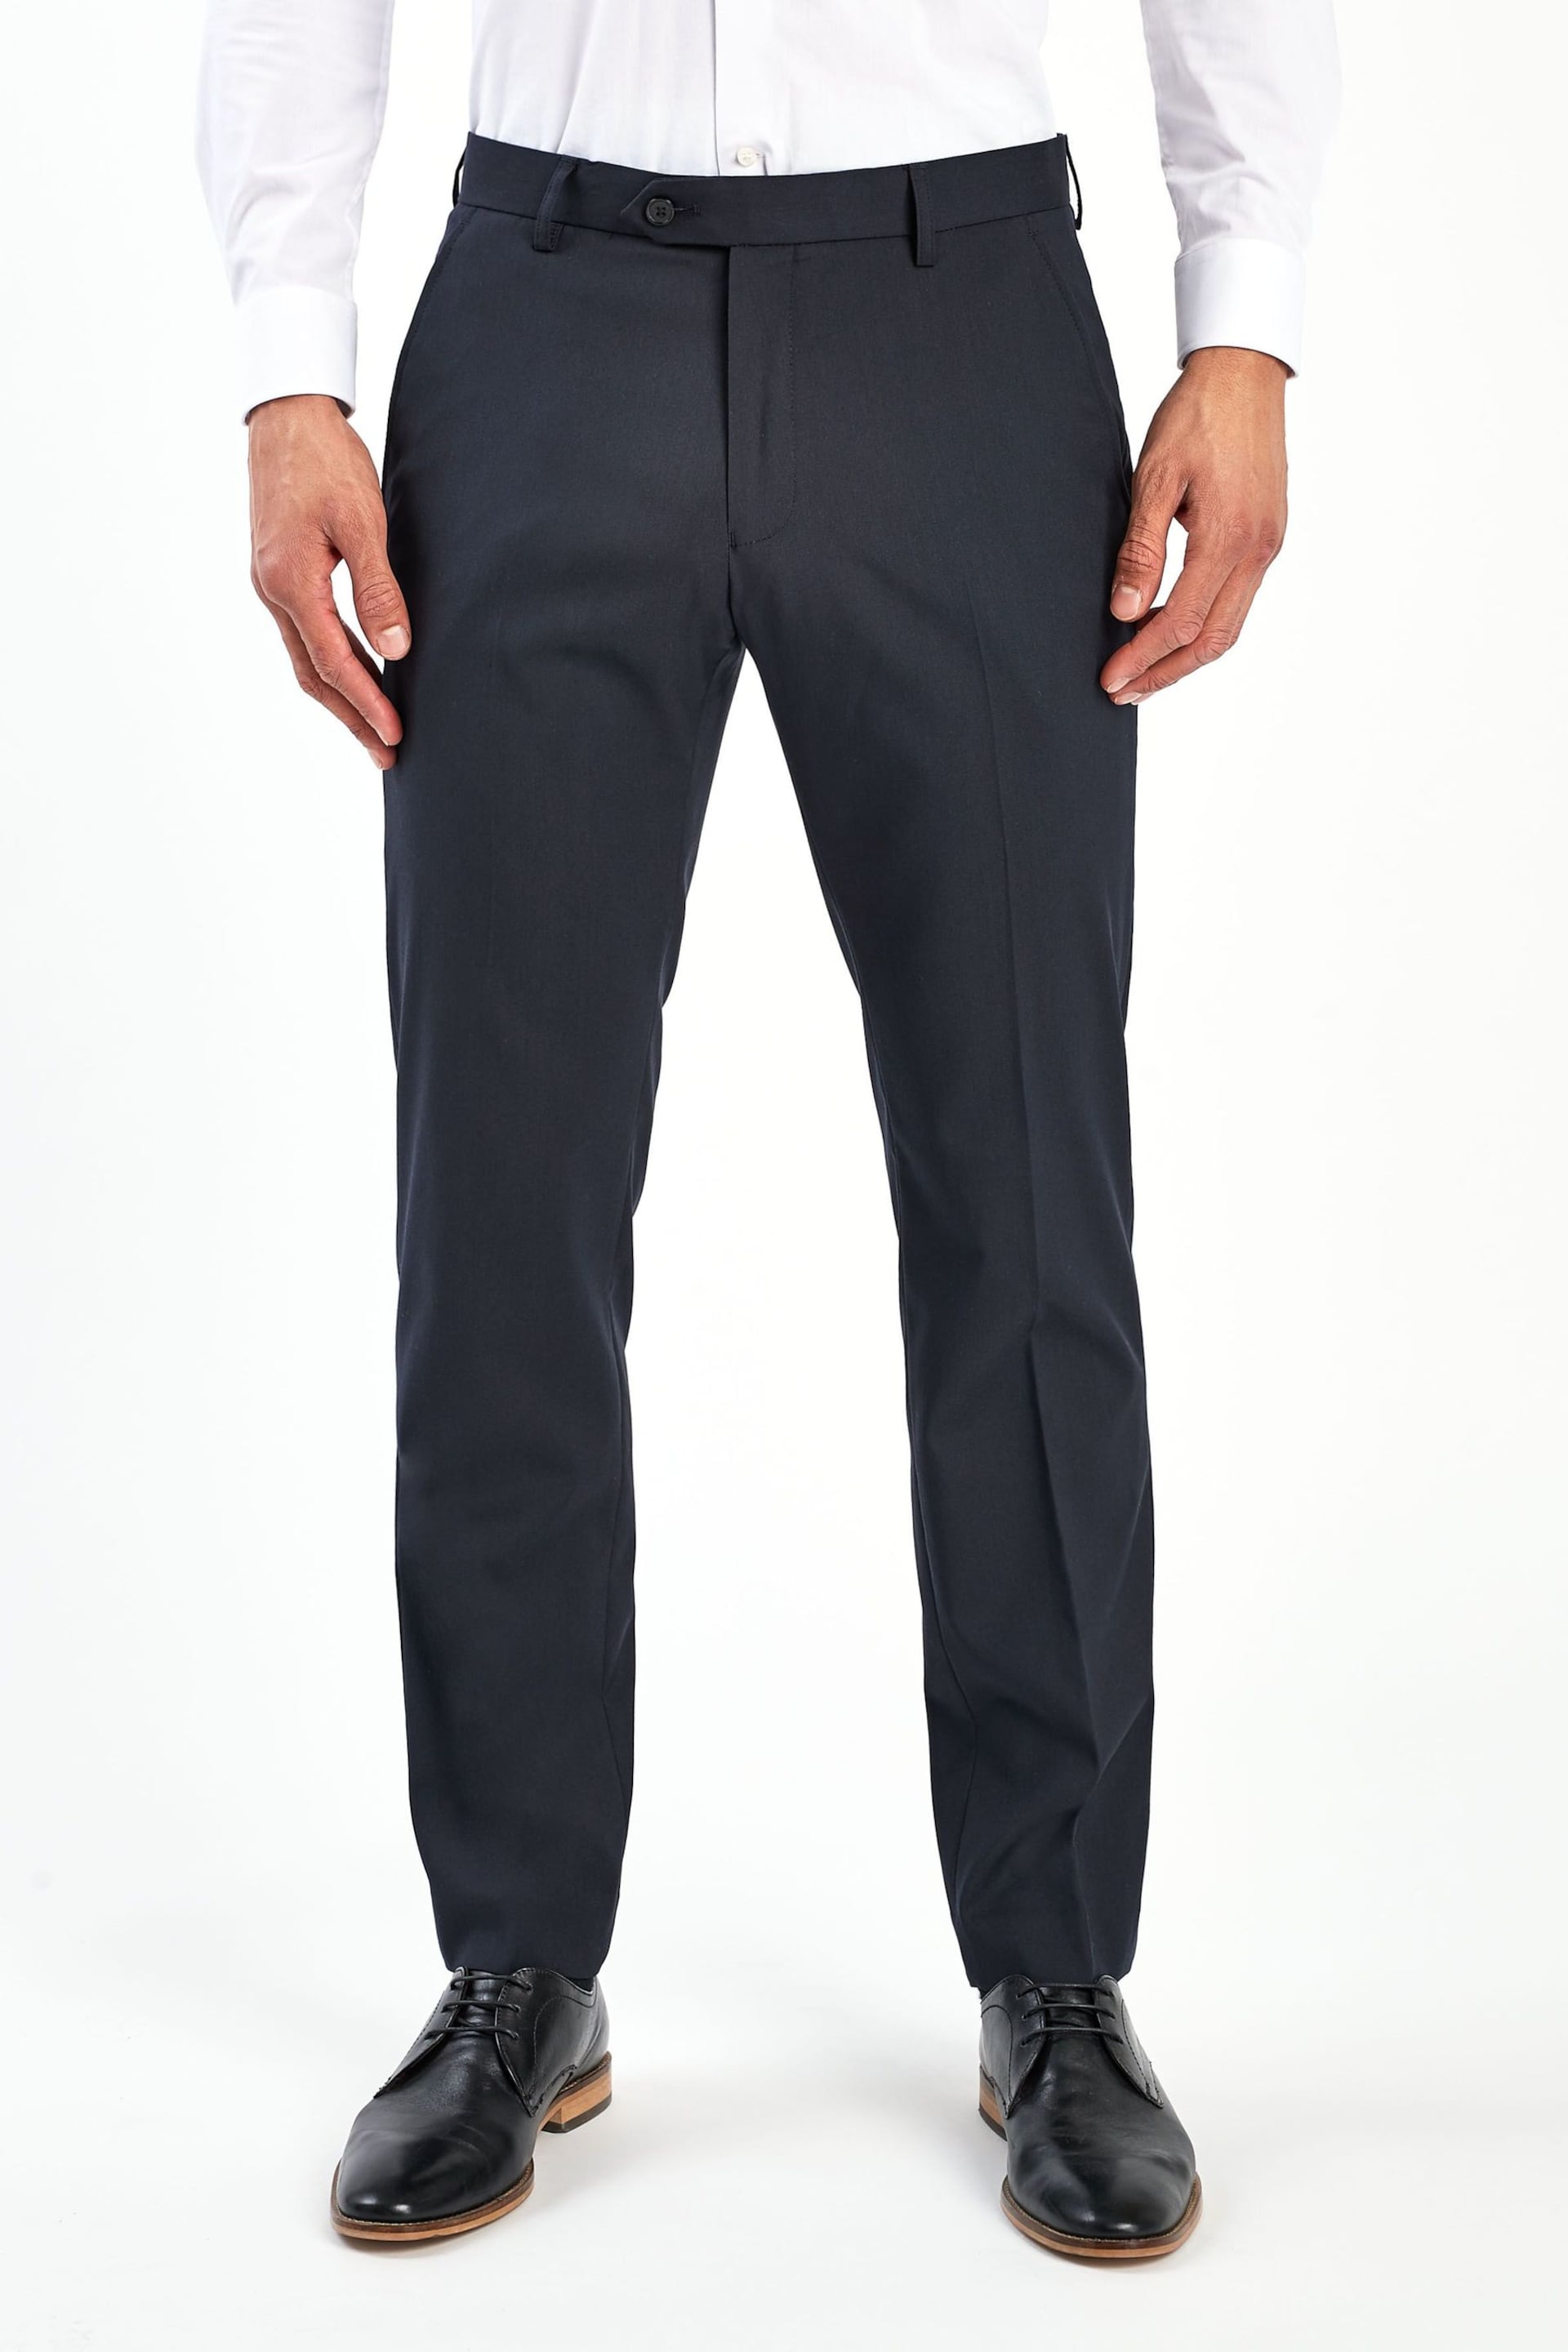 Navy Blue Tailored Stretch Smart Trousers - Image 1 of 4